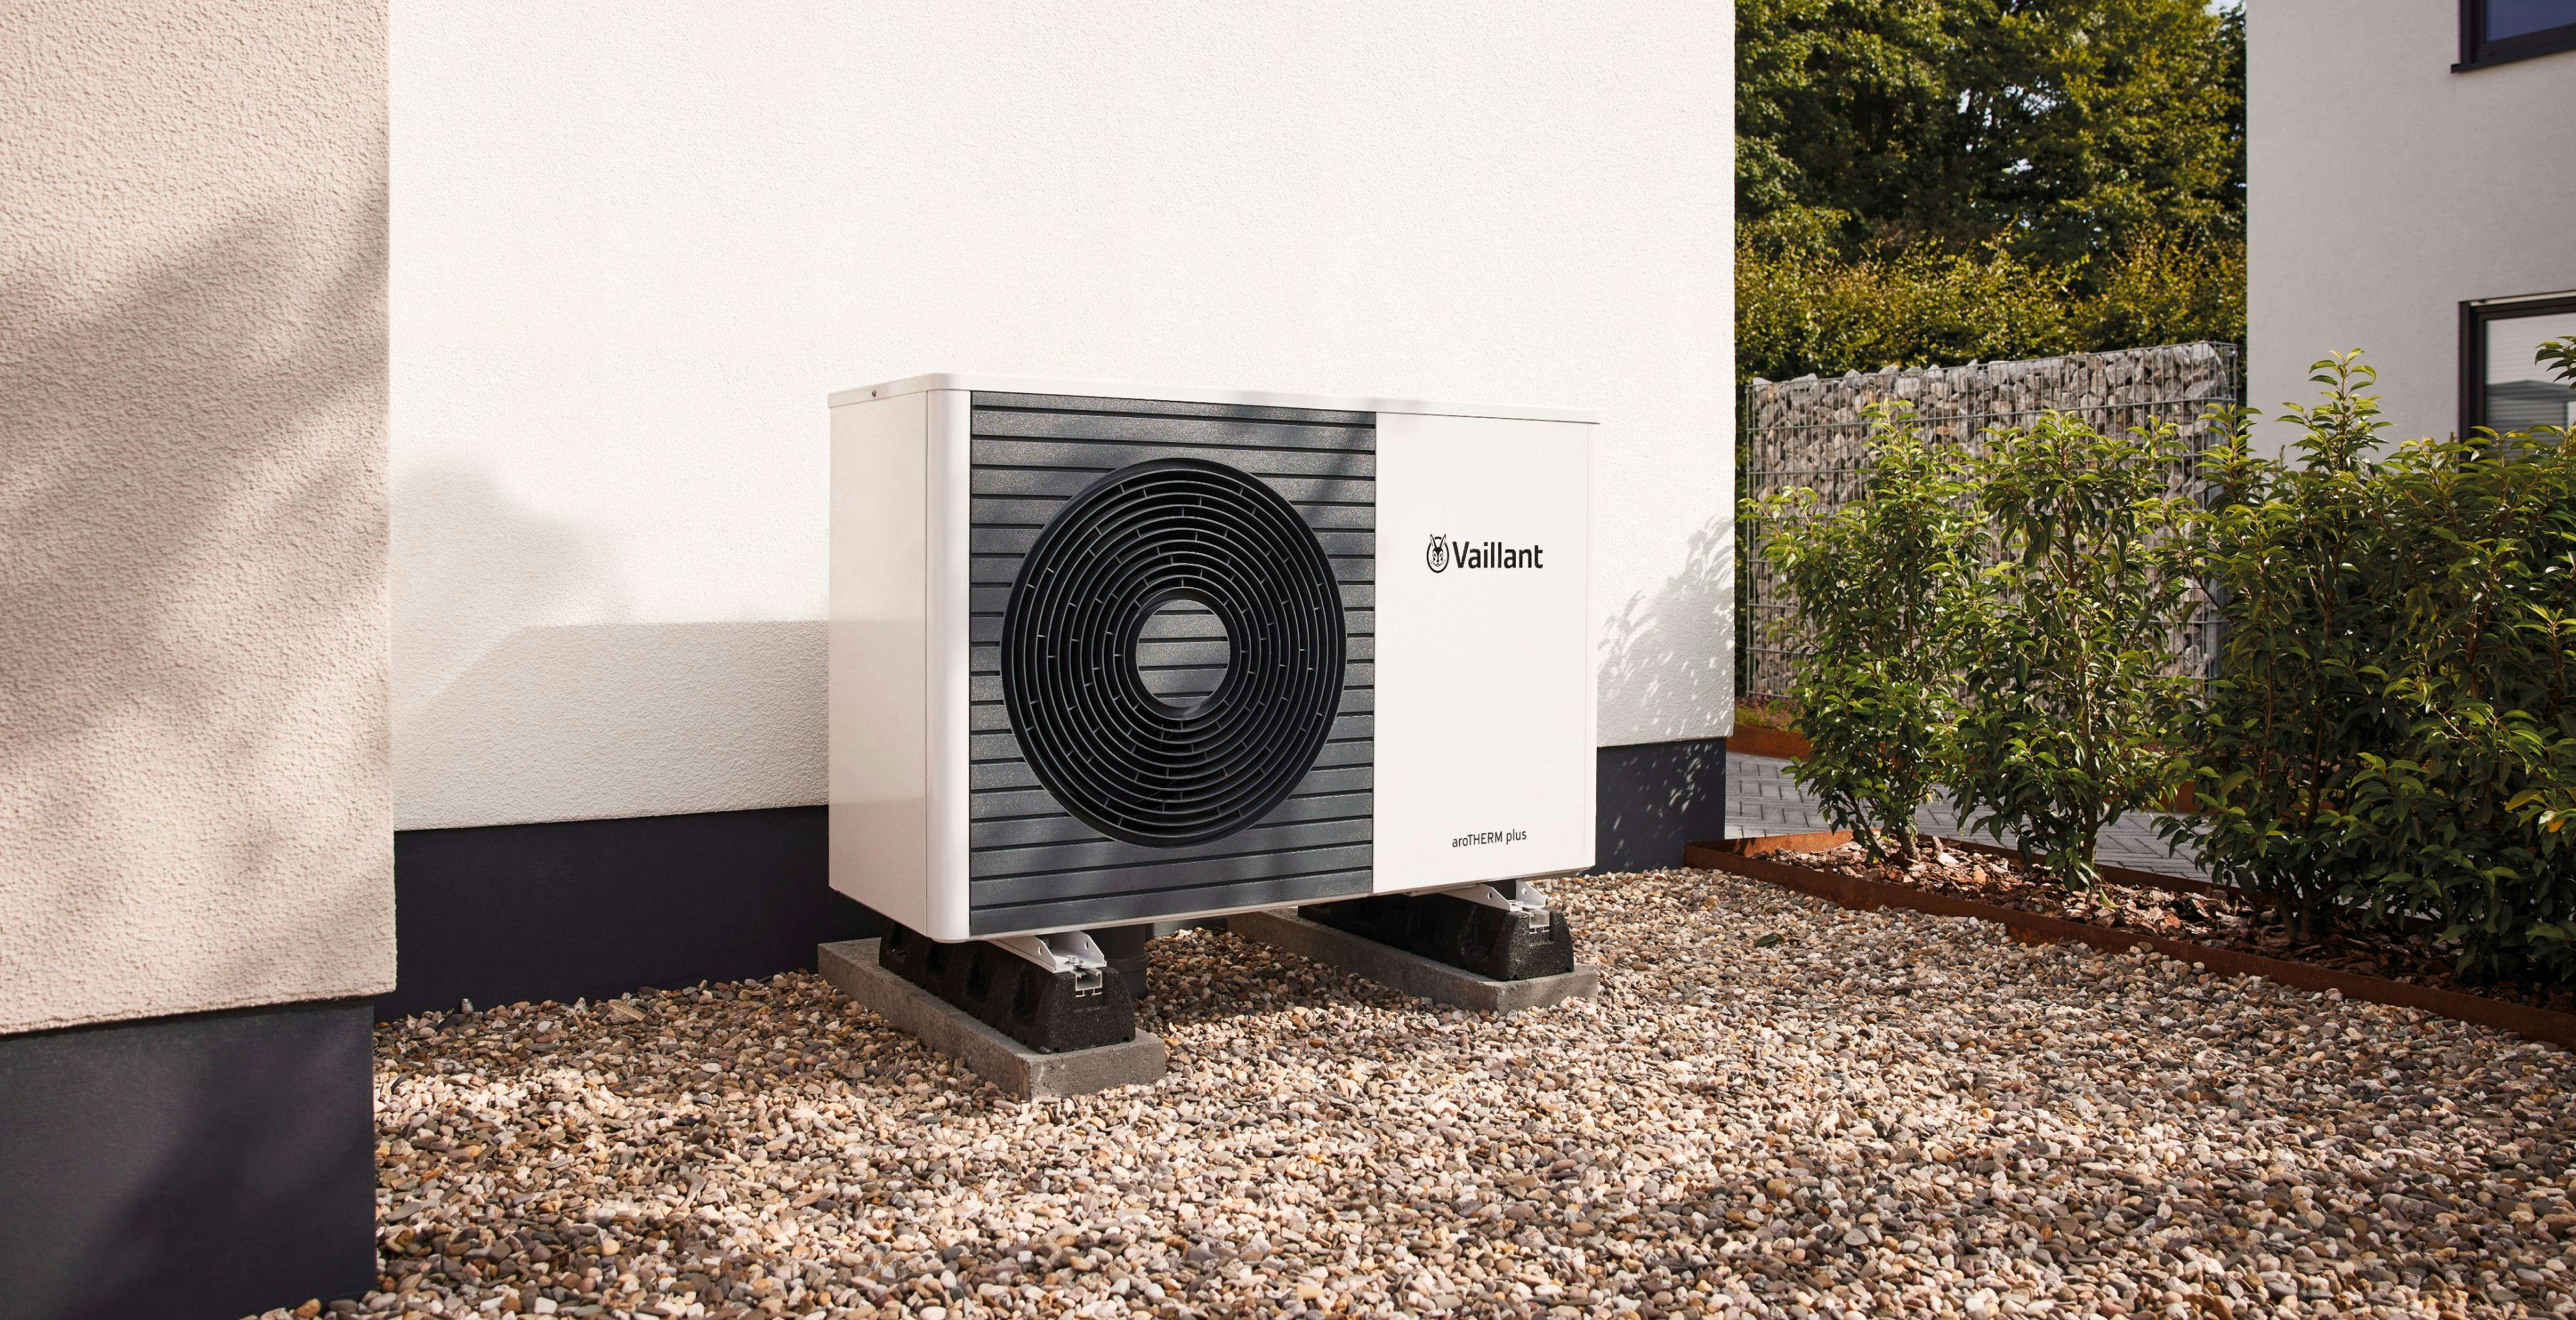 Air to water heat pump against a white wall on some gravel